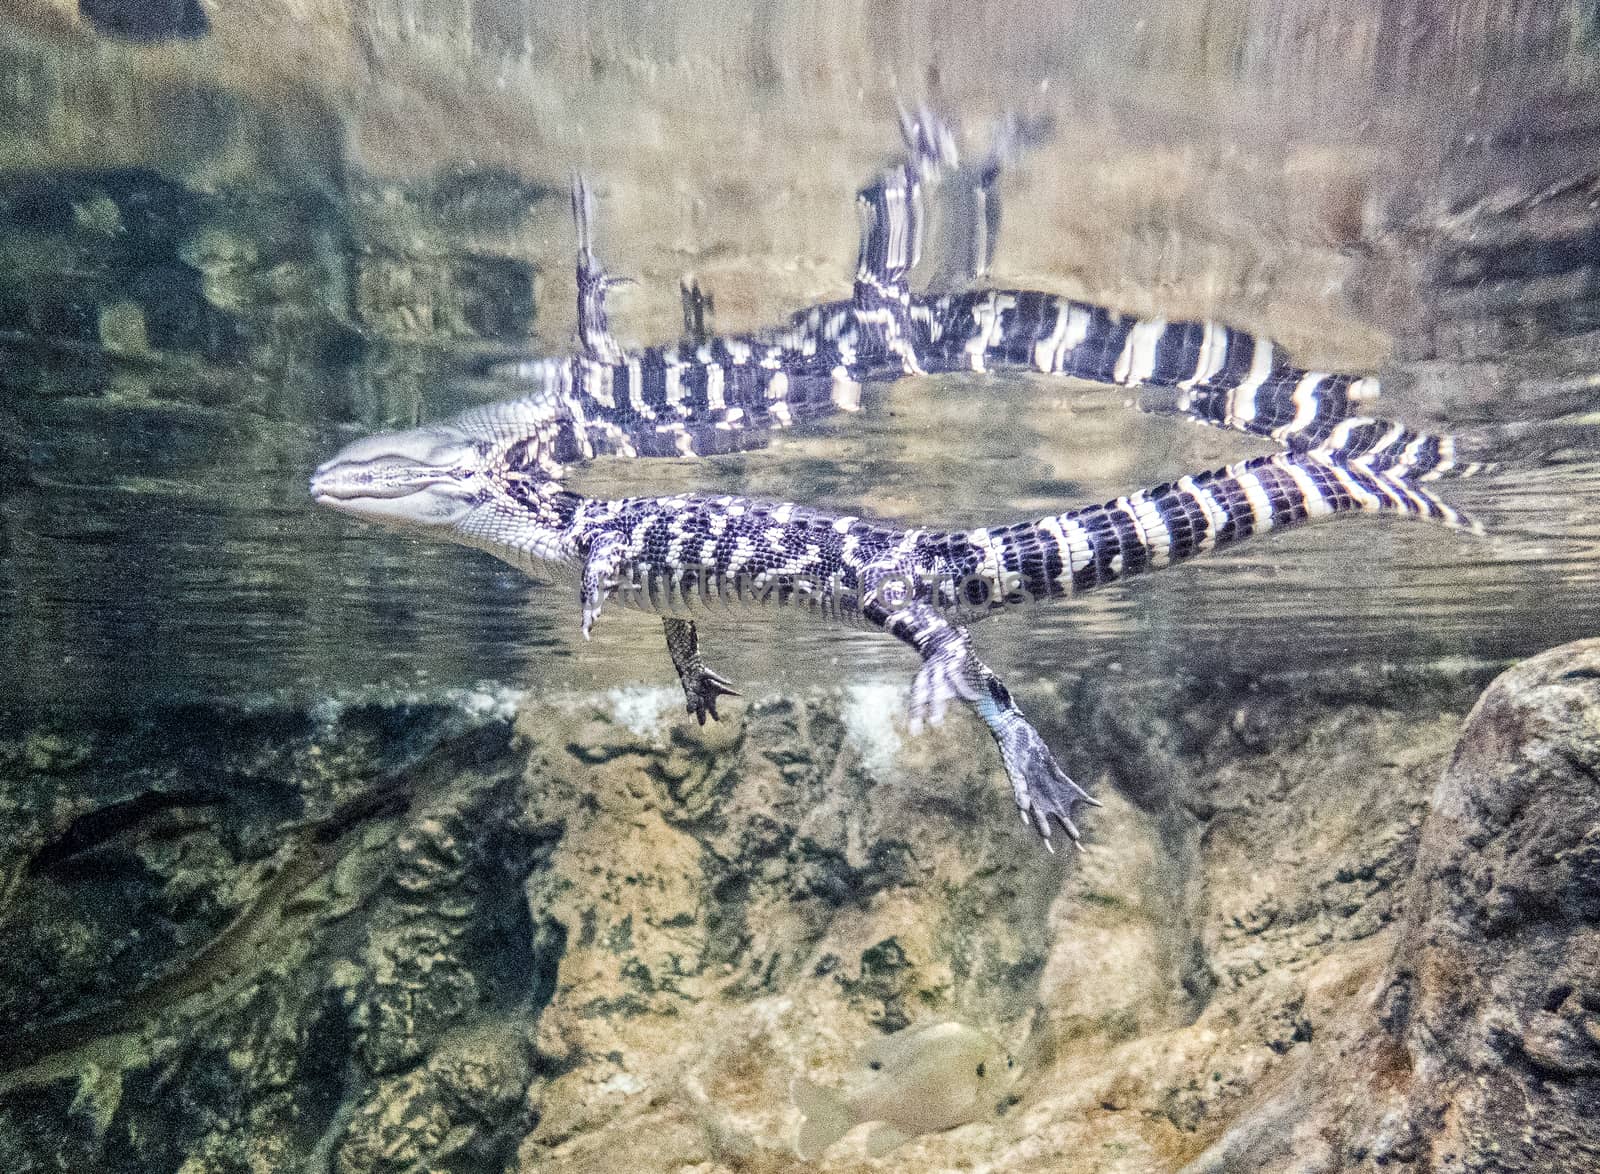 Juvenile American alligator in a body of water